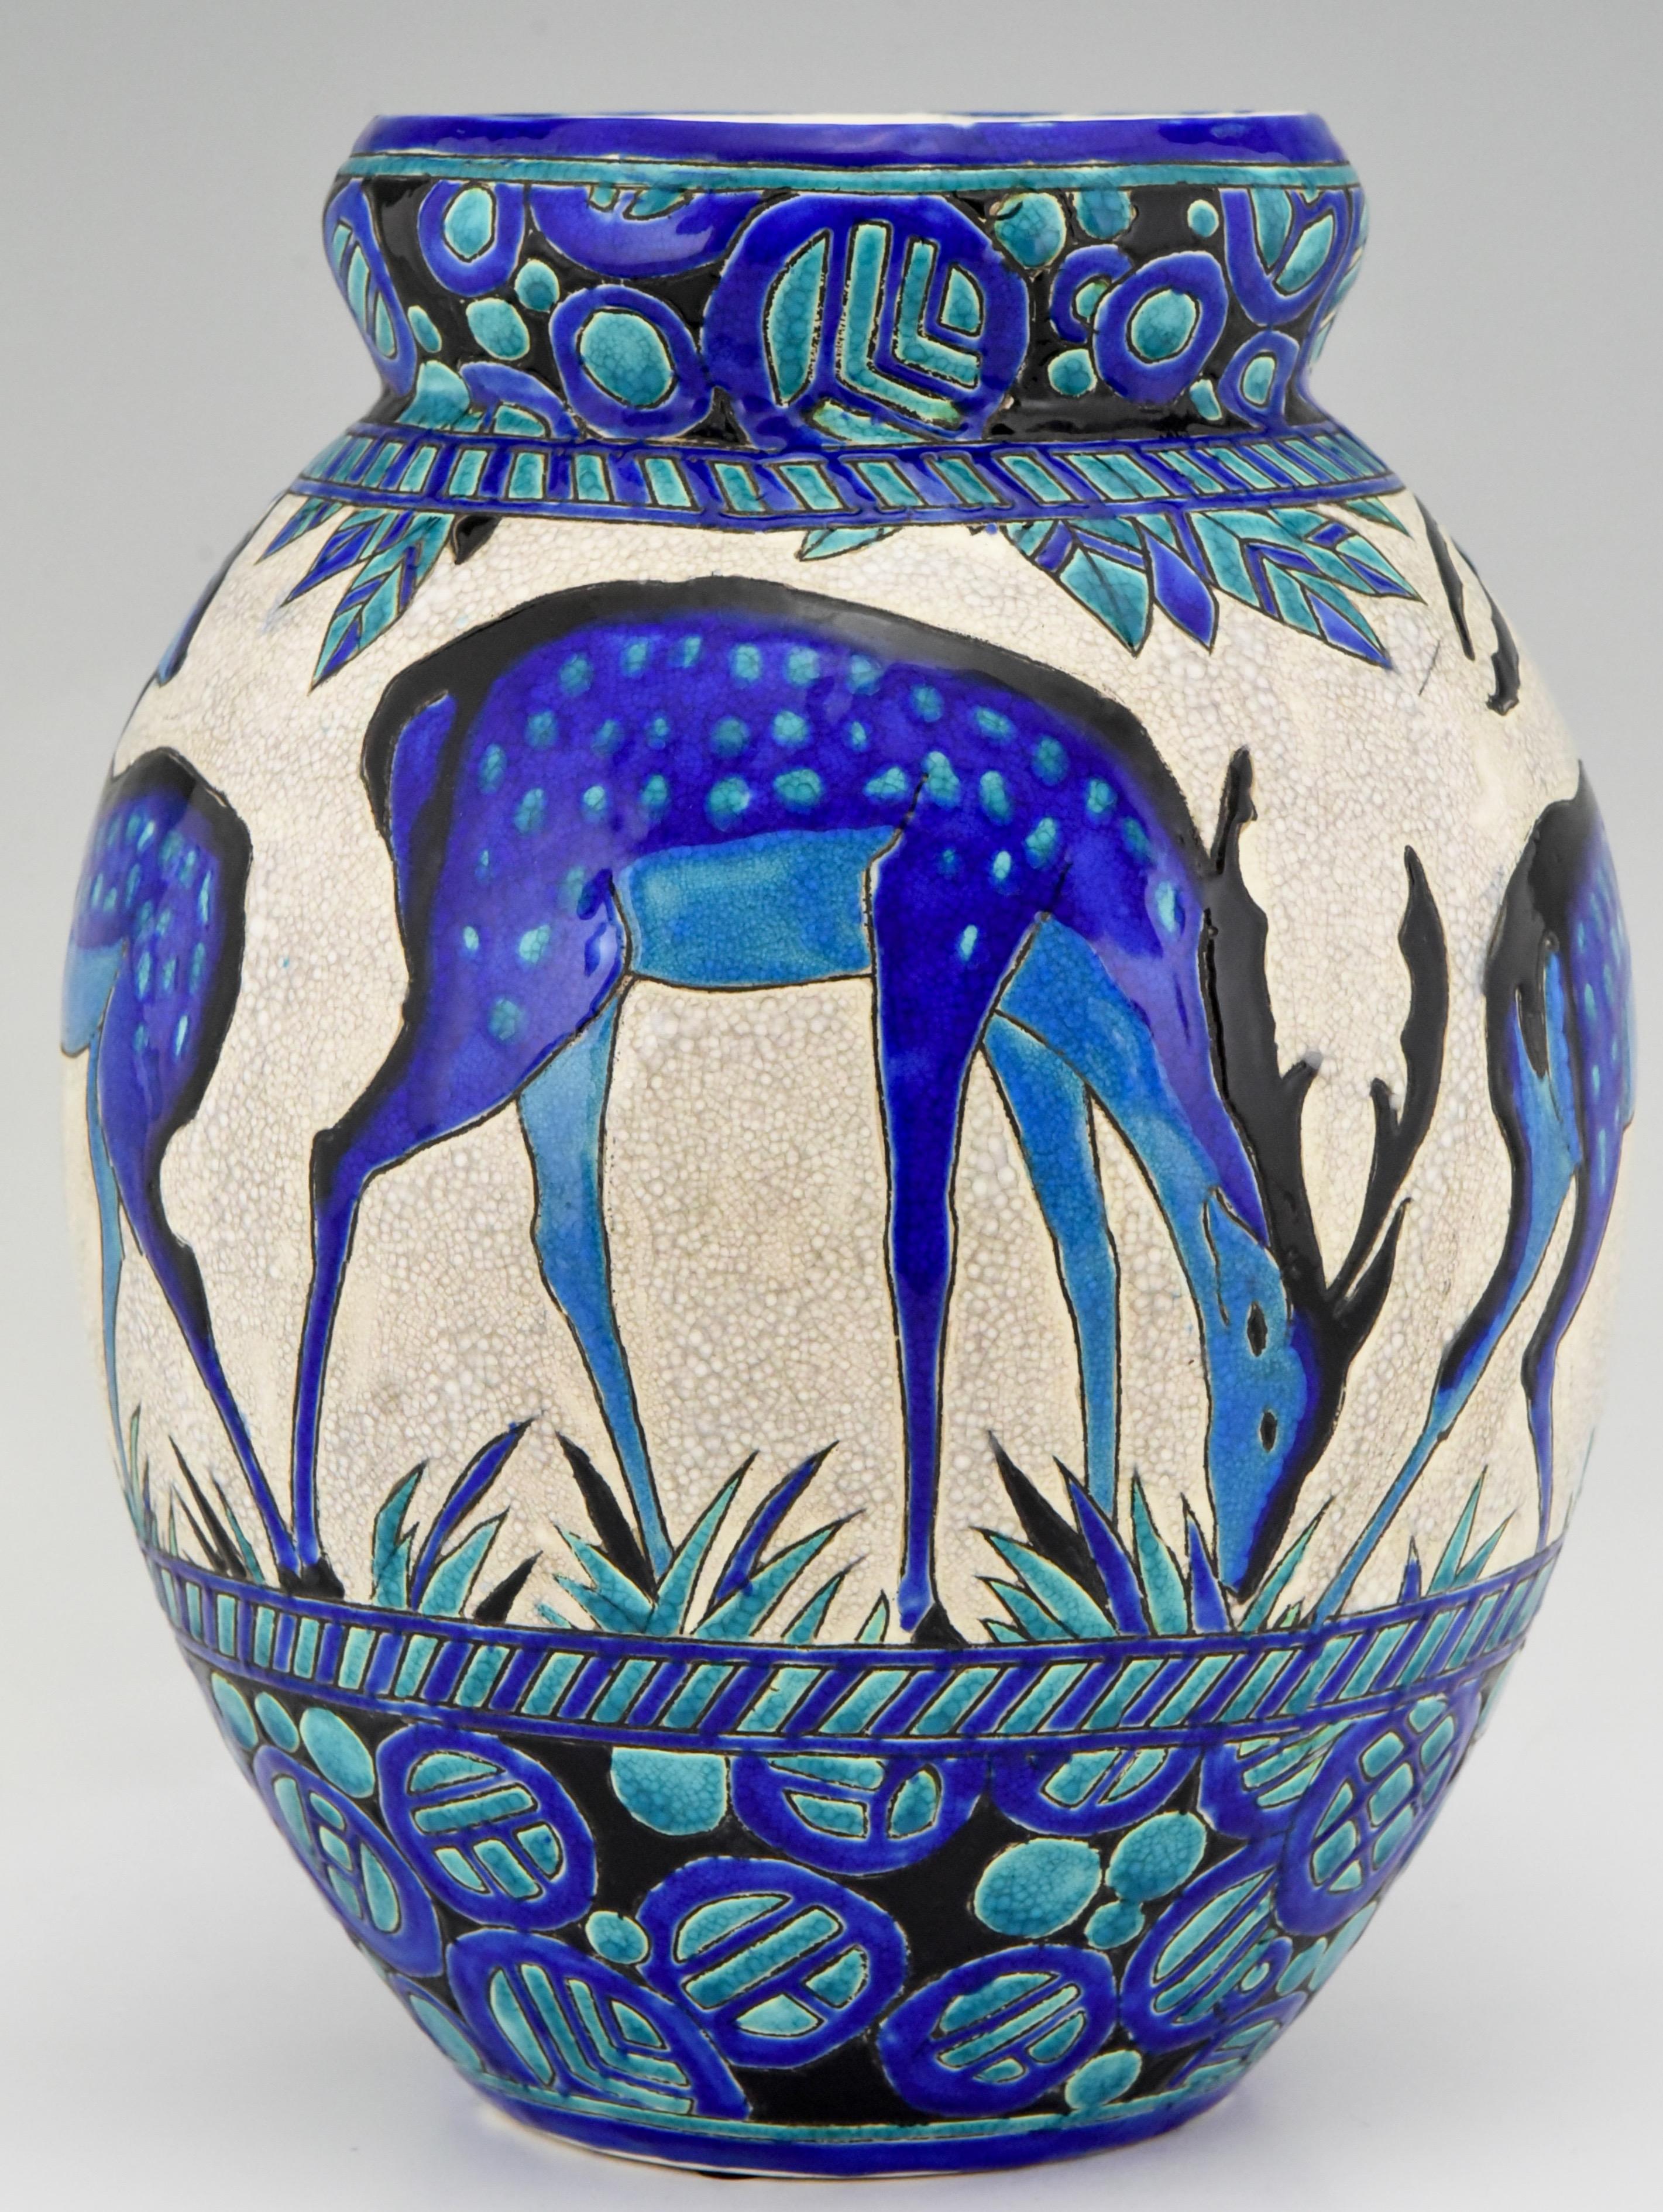 Charles Catteau Art Deco tall deer vase, from the line Biches Bleues for Boch frères, La Louviere, Belgium.
Signed and numbered D 943 for the decor created between 1924-1925
The line was exhibited at the 1925 Exposition Internationale des Arts